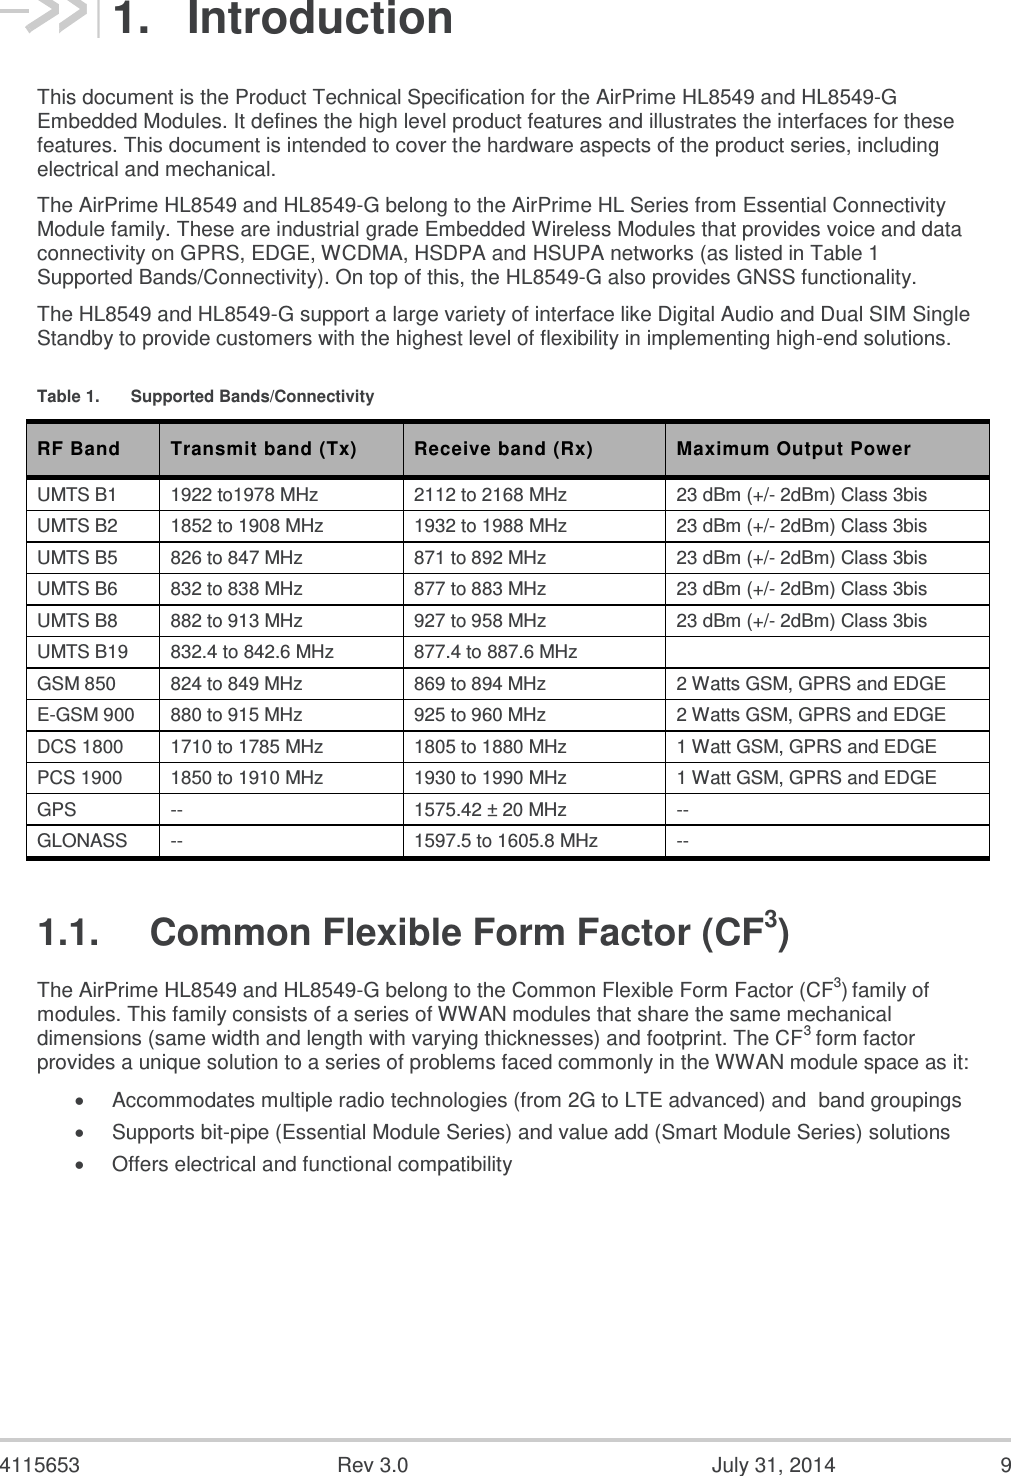  4115653  Rev 3.0  July 31, 2014  9 1.  Introduction This document is the Product Technical Specification for the AirPrime HL8549 and HL8549-G Embedded Modules. It defines the high level product features and illustrates the interfaces for these features. This document is intended to cover the hardware aspects of the product series, including electrical and mechanical. The AirPrime HL8549 and HL8549-G belong to the AirPrime HL Series from Essential Connectivity Module family. These are industrial grade Embedded Wireless Modules that provides voice and data connectivity on GPRS, EDGE, WCDMA, HSDPA and HSUPA networks (as listed in Table 1 Supported Bands/Connectivity). On top of this, the HL8549-G also provides GNSS functionality.  The HL8549 and HL8549-G support a large variety of interface like Digital Audio and Dual SIM Single Standby to provide customers with the highest level of flexibility in implementing high-end solutions. Table 1.  Supported Bands/Connectivity RF Band Transmit band (Tx) Receive band (Rx) Maximum Output Power UMTS B1 1922 to1978 MHz 2112 to 2168 MHz 23 dBm (+/- 2dBm) Class 3bis UMTS B2 1852 to 1908 MHz 1932 to 1988 MHz 23 dBm (+/- 2dBm) Class 3bis UMTS B5 826 to 847 MHz 871 to 892 MHz 23 dBm (+/- 2dBm) Class 3bis UMTS B6 832 to 838 MHz 877 to 883 MHz 23 dBm (+/- 2dBm) Class 3bis UMTS B8 882 to 913 MHz 927 to 958 MHz 23 dBm (+/- 2dBm) Class 3bis UMTS B19 832.4 to 842.6 MHz 877.4 to 887.6 MHz  GSM 850 824 to 849 MHz 869 to 894 MHz 2 Watts GSM, GPRS and EDGE E-GSM 900 880 to 915 MHz 925 to 960 MHz 2 Watts GSM, GPRS and EDGE DCS 1800 1710 to 1785 MHz 1805 to 1880 MHz 1 Watt GSM, GPRS and EDGE PCS 1900 1850 to 1910 MHz 1930 to 1990 MHz 1 Watt GSM, GPRS and EDGE GPS -- 1575.42 ± 20 MHz -- GLONASS -- 1597.5 to 1605.8 MHz -- 1.1.  Common Flexible Form Factor (CF3) The AirPrime HL8549 and HL8549-G belong to the Common Flexible Form Factor (CF3) family of modules. This family consists of a series of WWAN modules that share the same mechanical dimensions (same width and length with varying thicknesses) and footprint. The CF3 form factor provides a unique solution to a series of problems faced commonly in the WWAN module space as it:  Accommodates multiple radio technologies (from 2G to LTE advanced) and  band groupings  Supports bit-pipe (Essential Module Series) and value add (Smart Module Series) solutions  Offers electrical and functional compatibility     